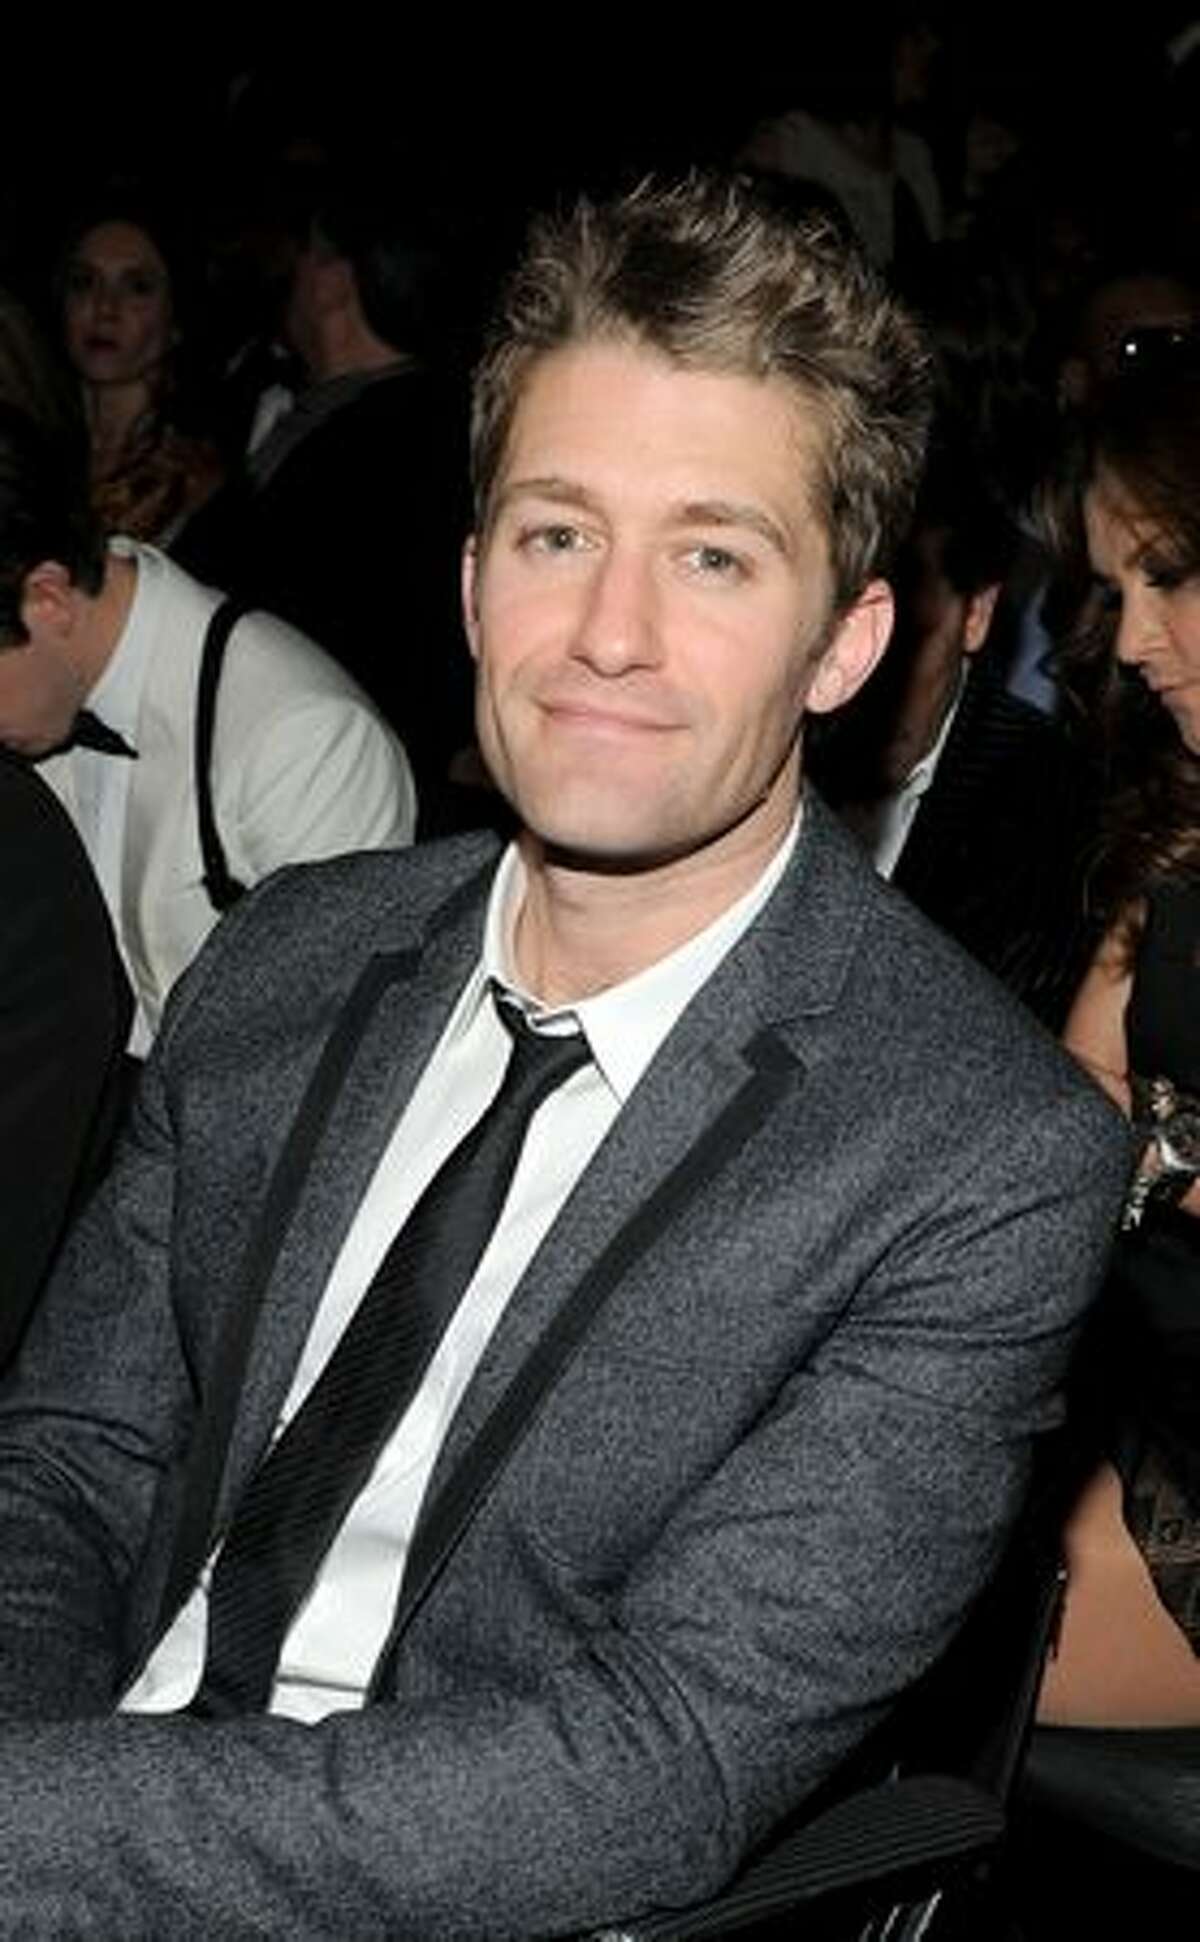 Actor Matthew Morrison attends The 53rd Annual GRAMMY Awards held at Staples Center in Los Angeles, California.